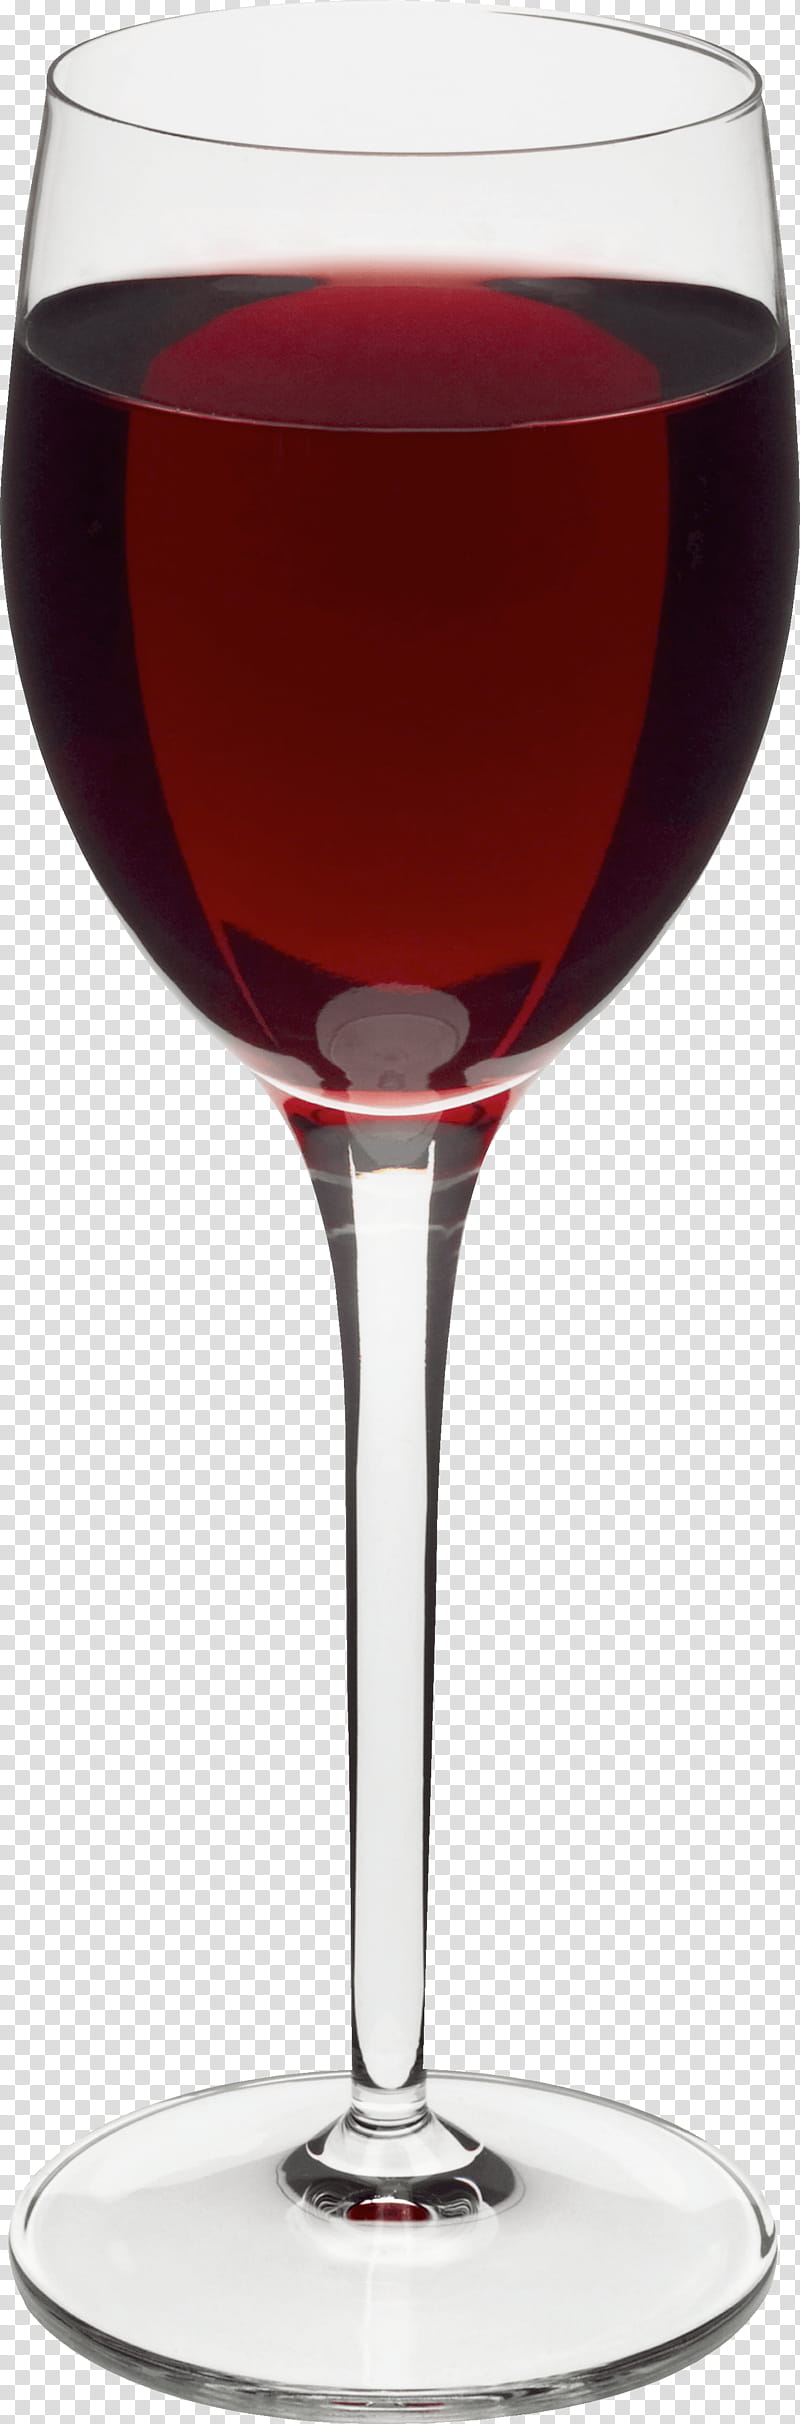 Champagne Bottle, Red Wine, White Wine, Cocktail, Wine Glass, Champagne Glass, Cup, Cocktail Glass transparent background PNG clipart